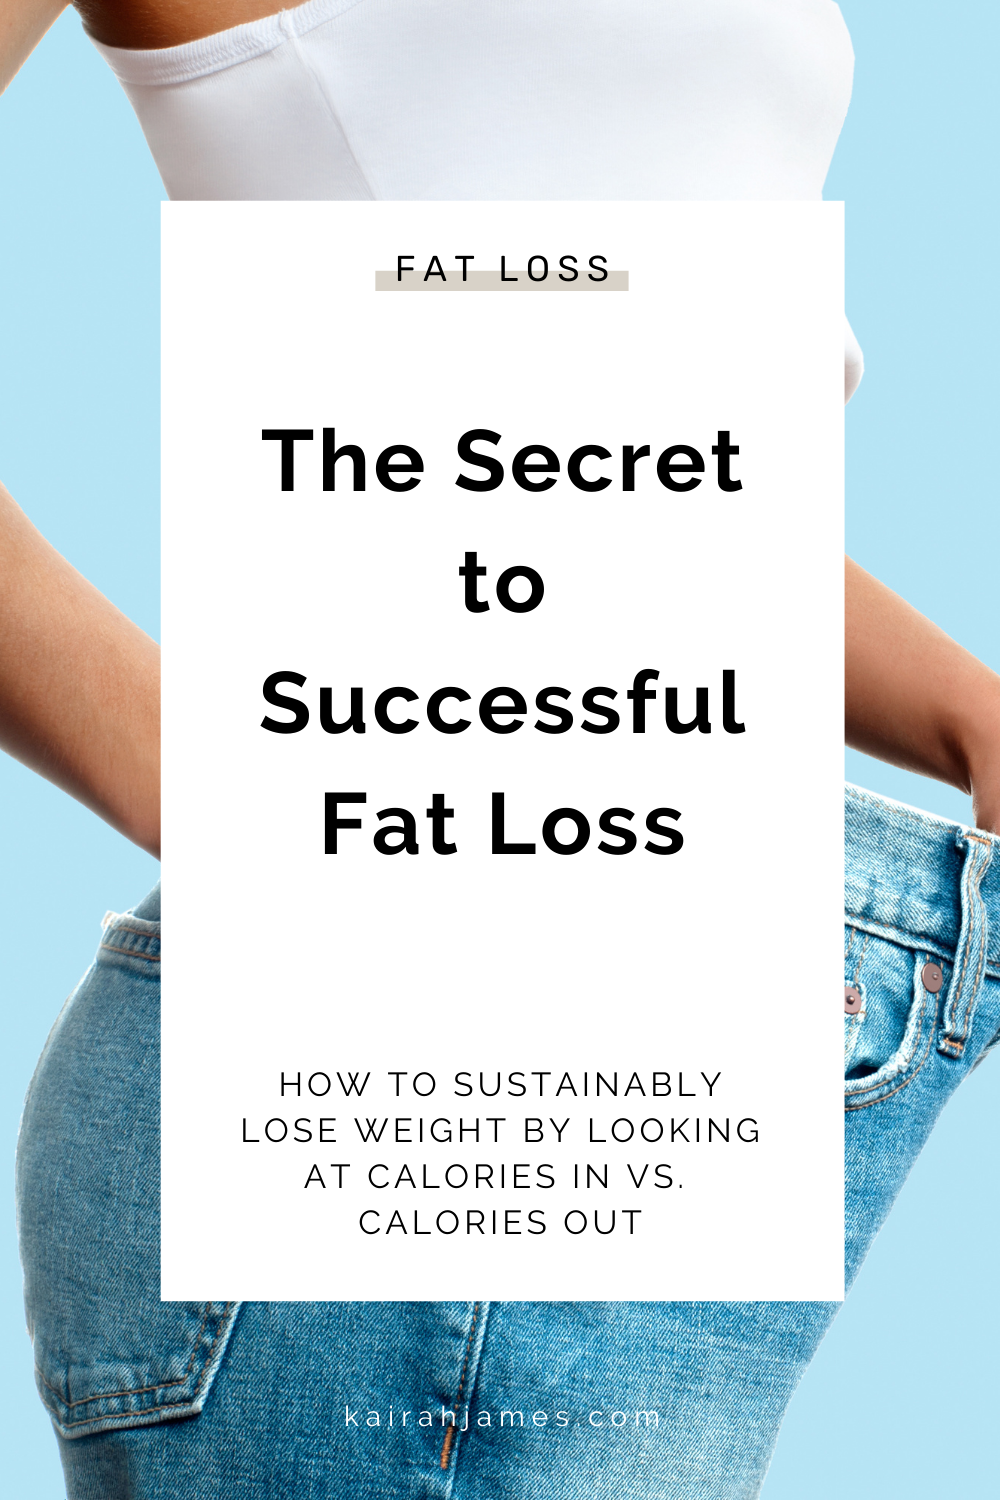 Weight loss for women can be difficult if you're not using the right methods. Knowing how to lose 10 pounds is great, but having the tools to continue to lose fat sustainably is even better! Learn the secret to successful fat loss and get access to a FREE 5-Day mini course that teaches you how to lose your first 10lbs! | Fat Loss for Women | Weight Loss Plan | Sustainable Fat Loss   #fatlosstips     #fatlosshelp     #fatlosscoach   via @kairahjames